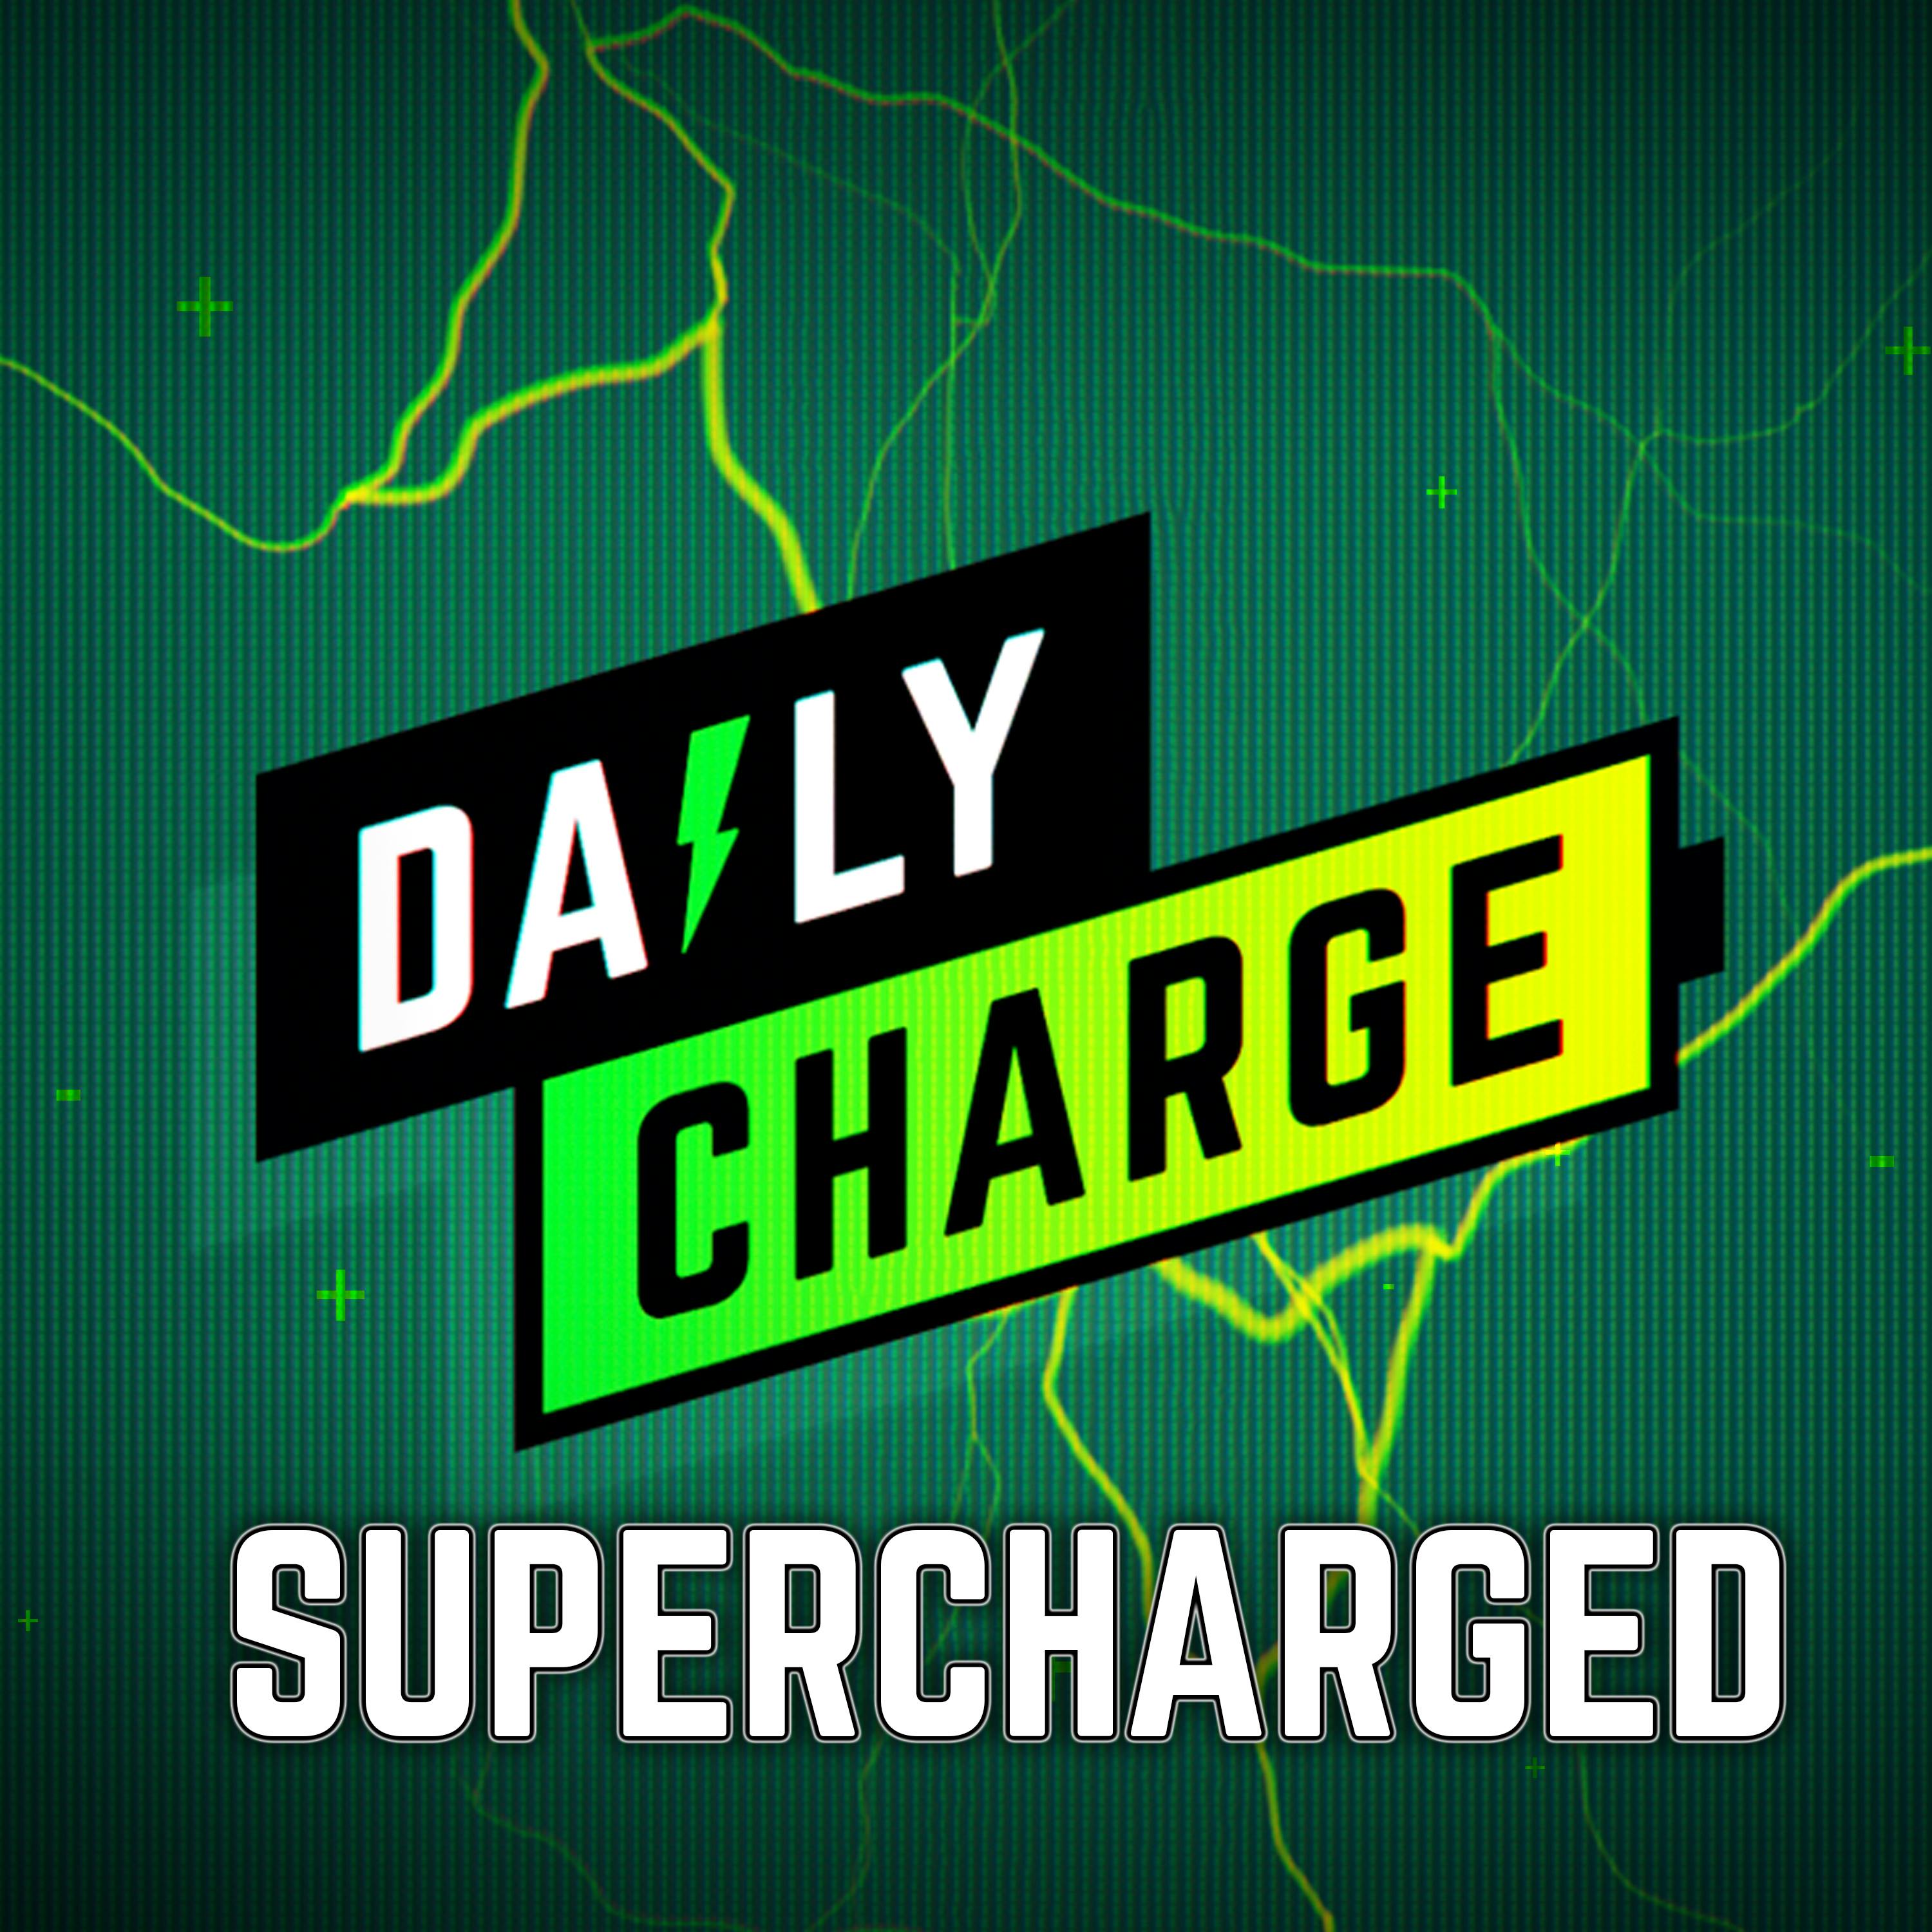 Where does Disney+ go from here? (The Daily SUPERCharge, 2/5/2020)